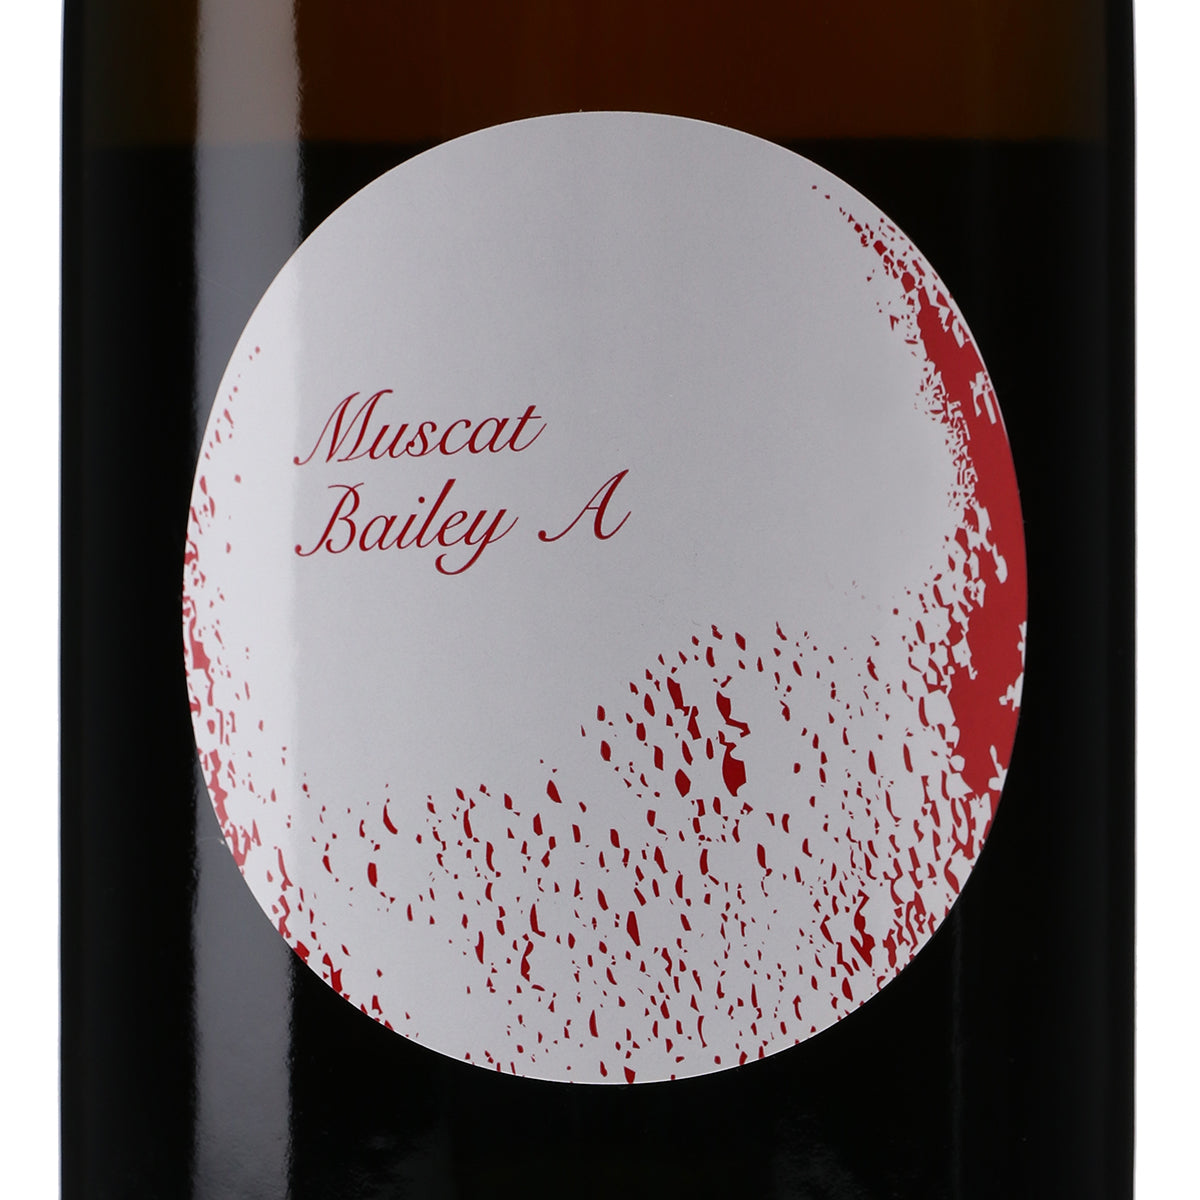 Muscat Bailey A 2020 extra brut